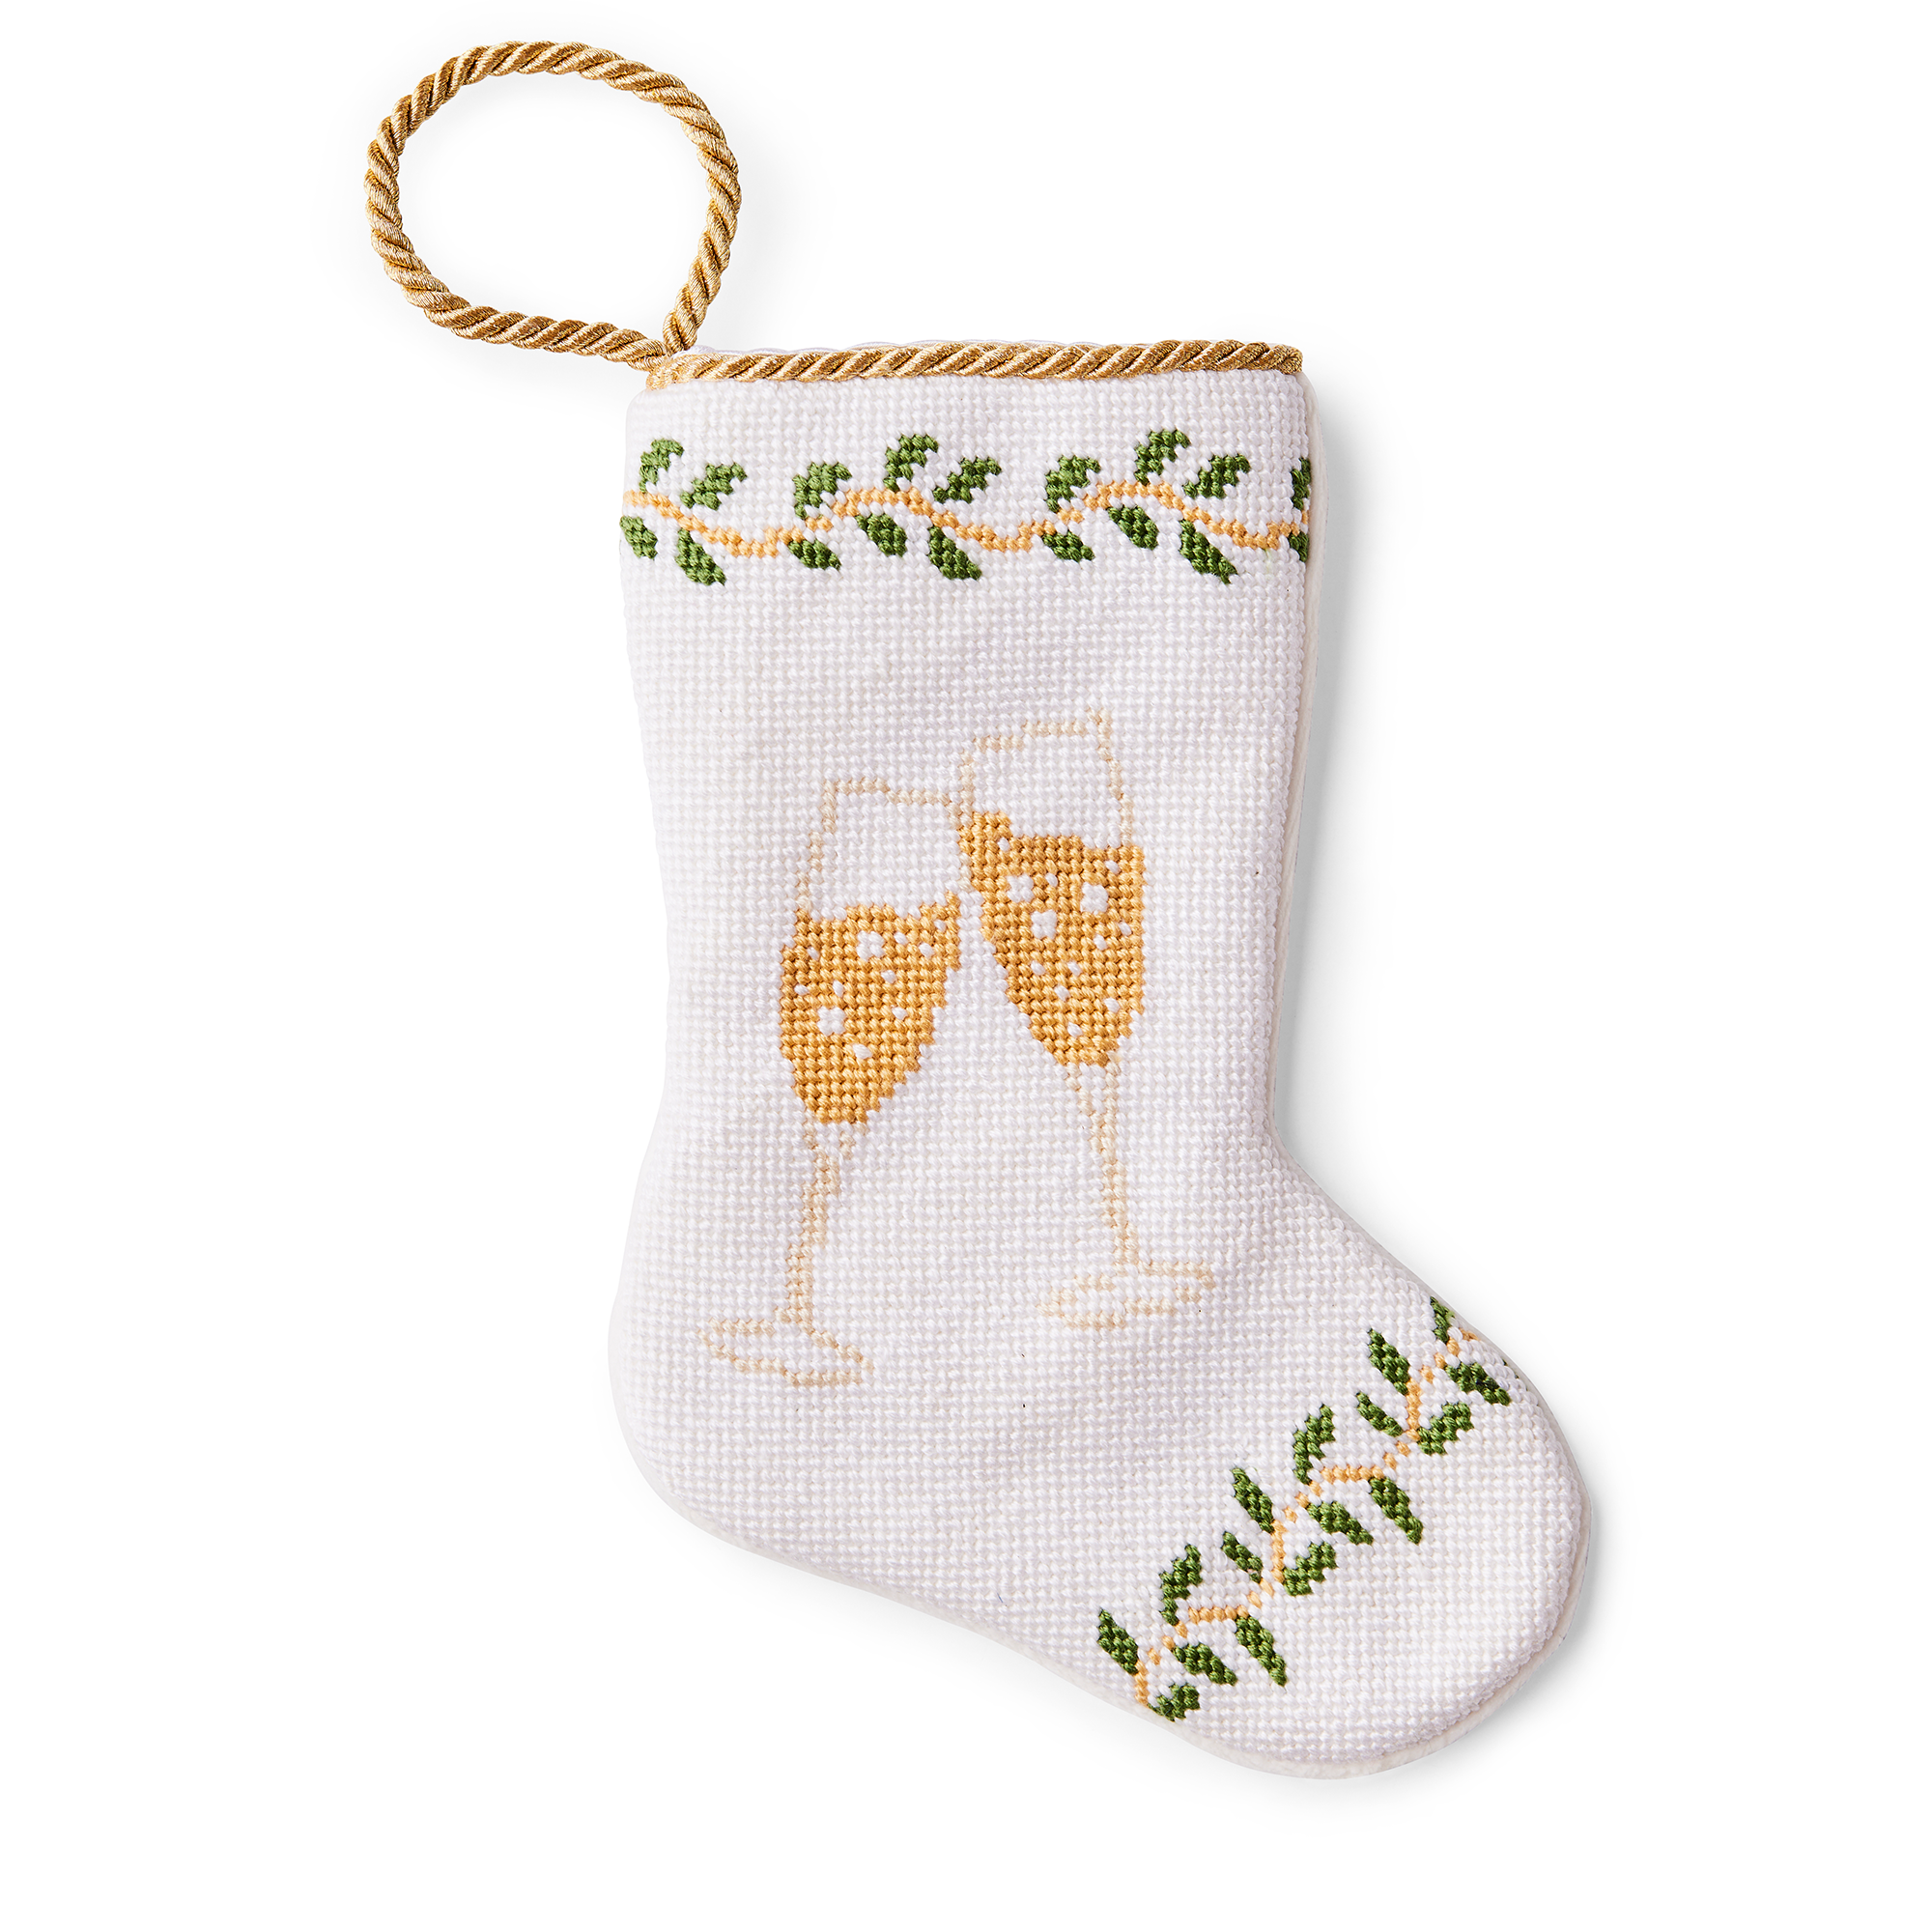 A charming Christmas stocking, featuring an illustrated clinking champagne glasses. The festive scene features sparkling bubbles, capturing the celebratory spirit of the season. Perfect as tree ornaments, place settings, or hanging by the fireplace.